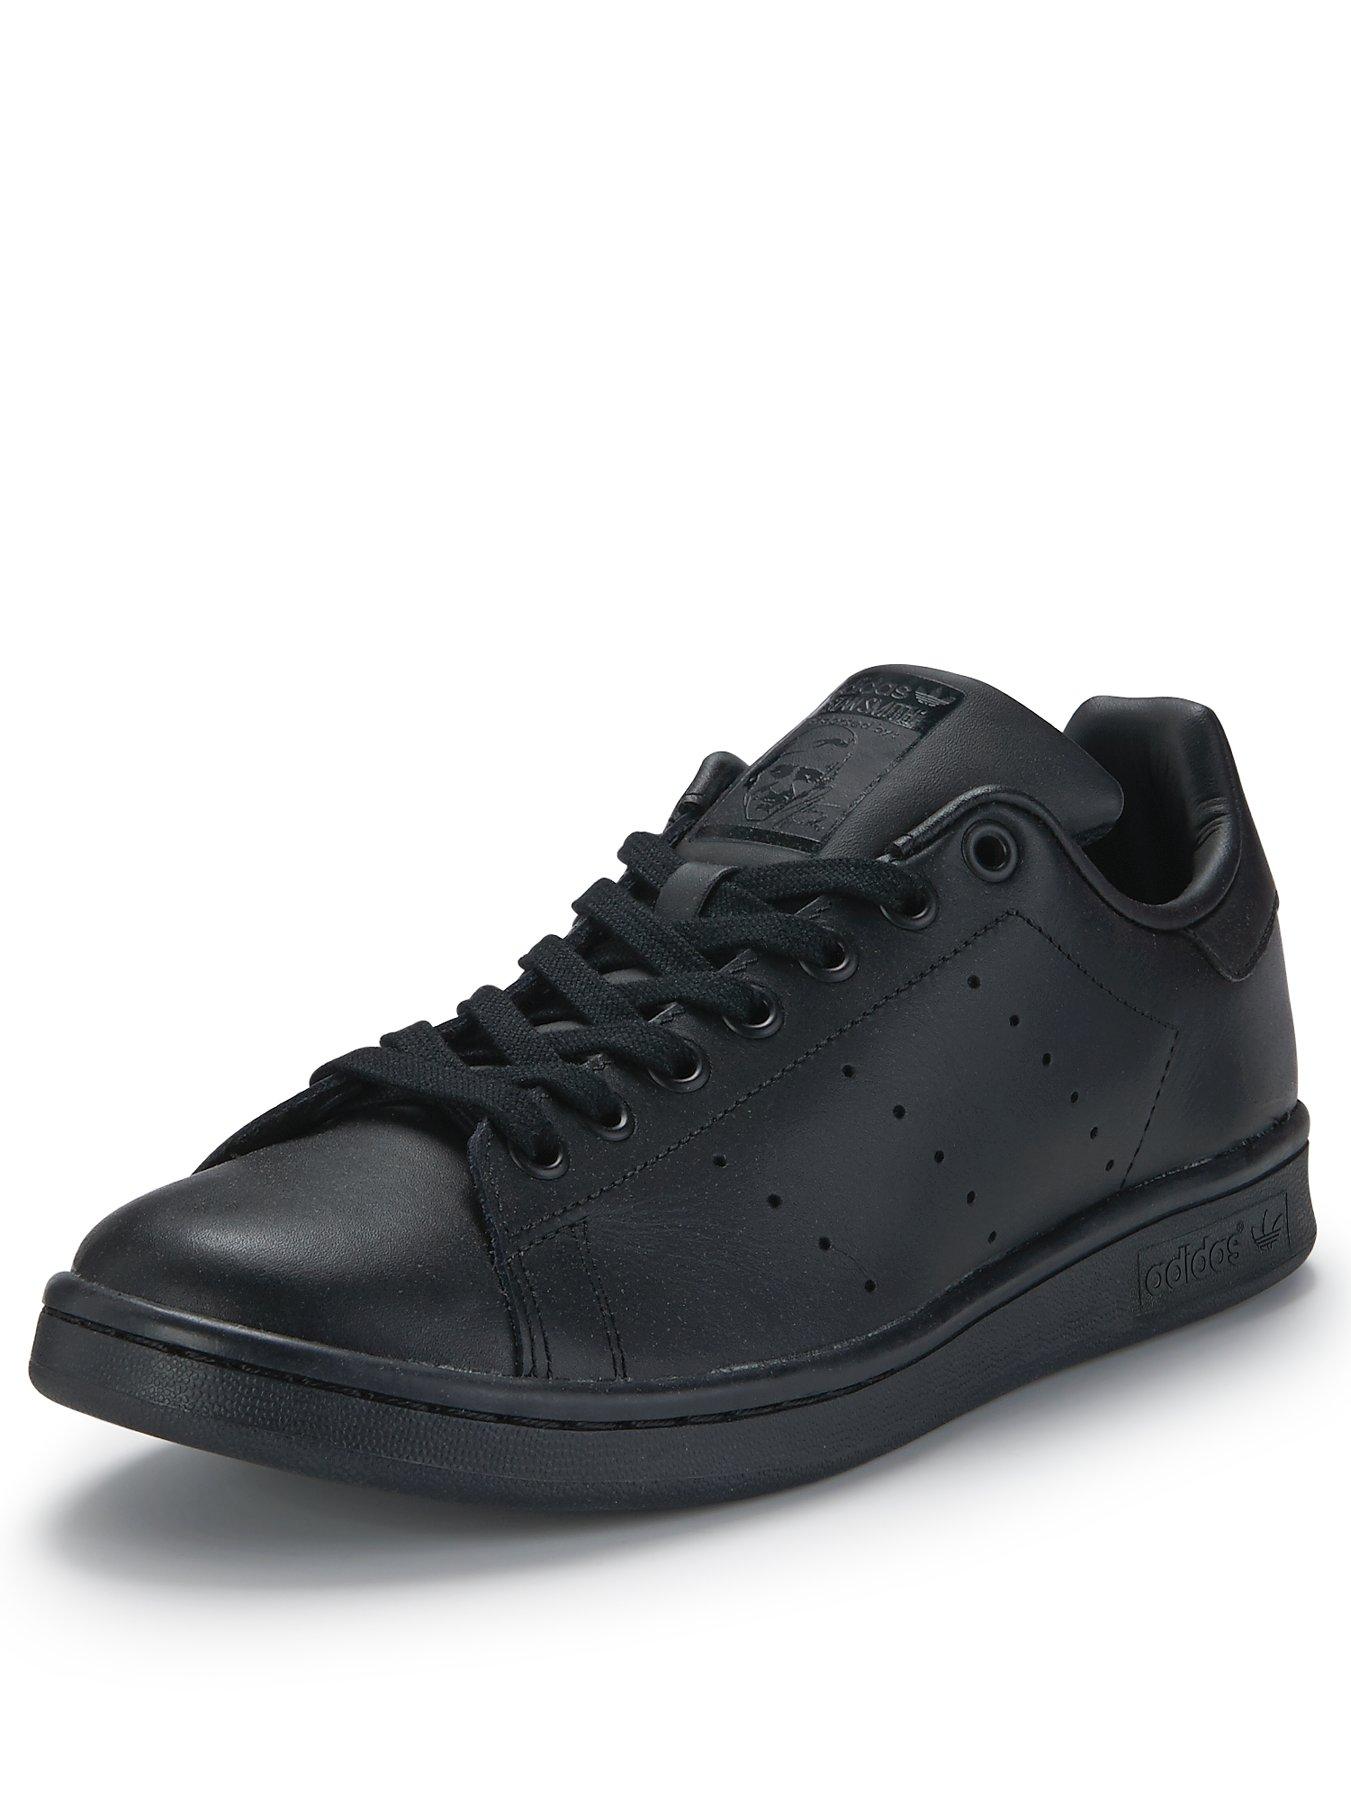 stan smith mens trainers